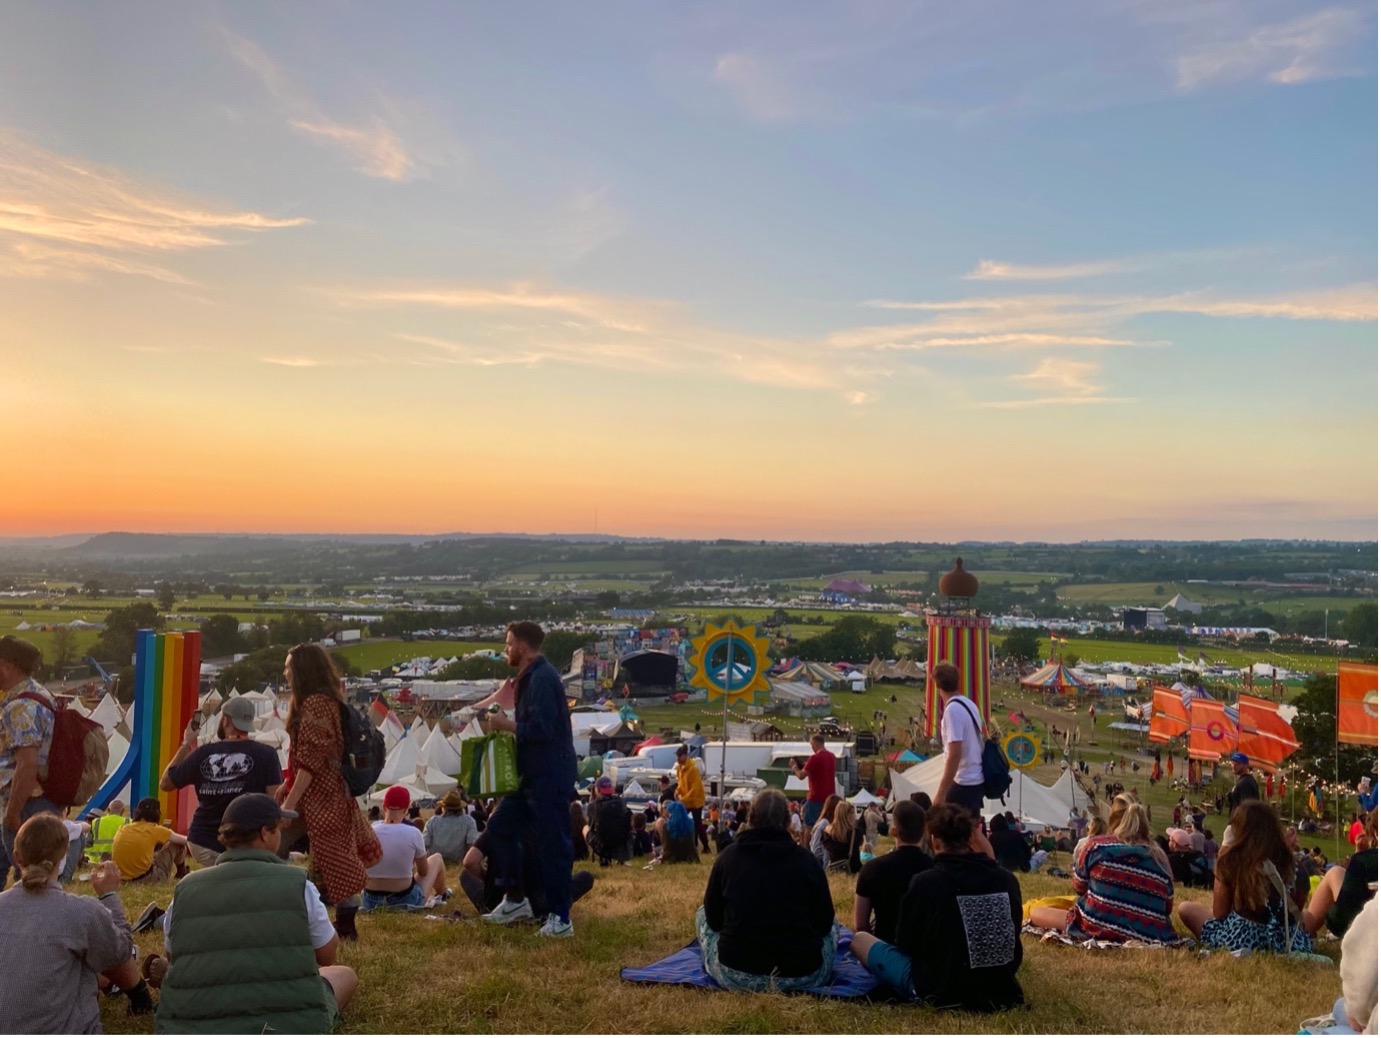 Glastonbury Festival and its dedication to music, experience, and the environment